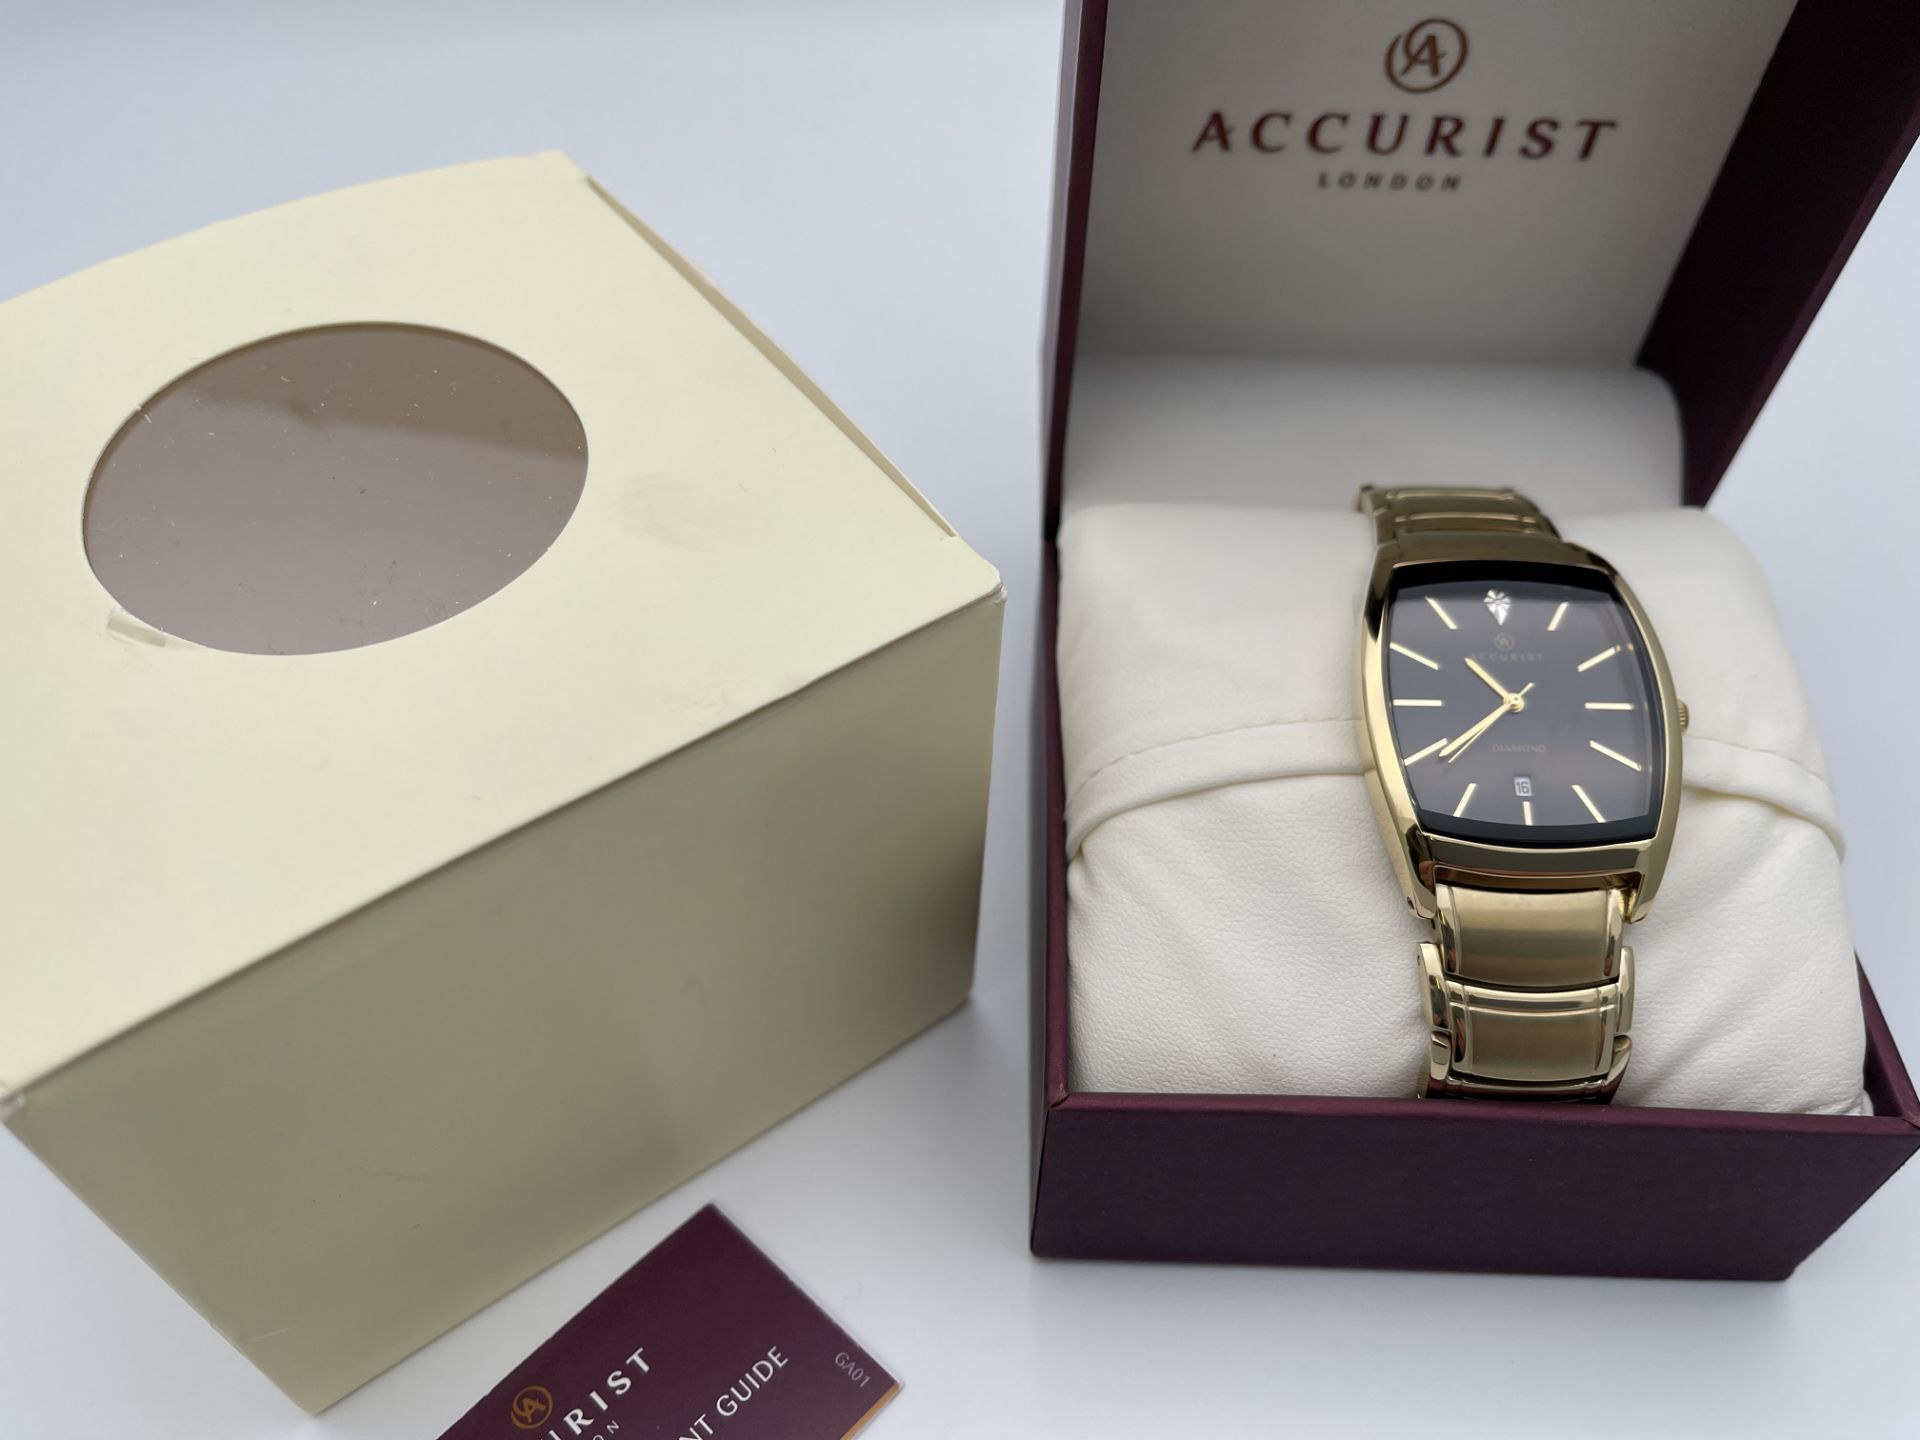 BOXED ACCURIST GENTS GOLD TONE WATCH, MODEL- KC5445, WORKING, APPEARS NEW, NEEDS NEW PIN TO